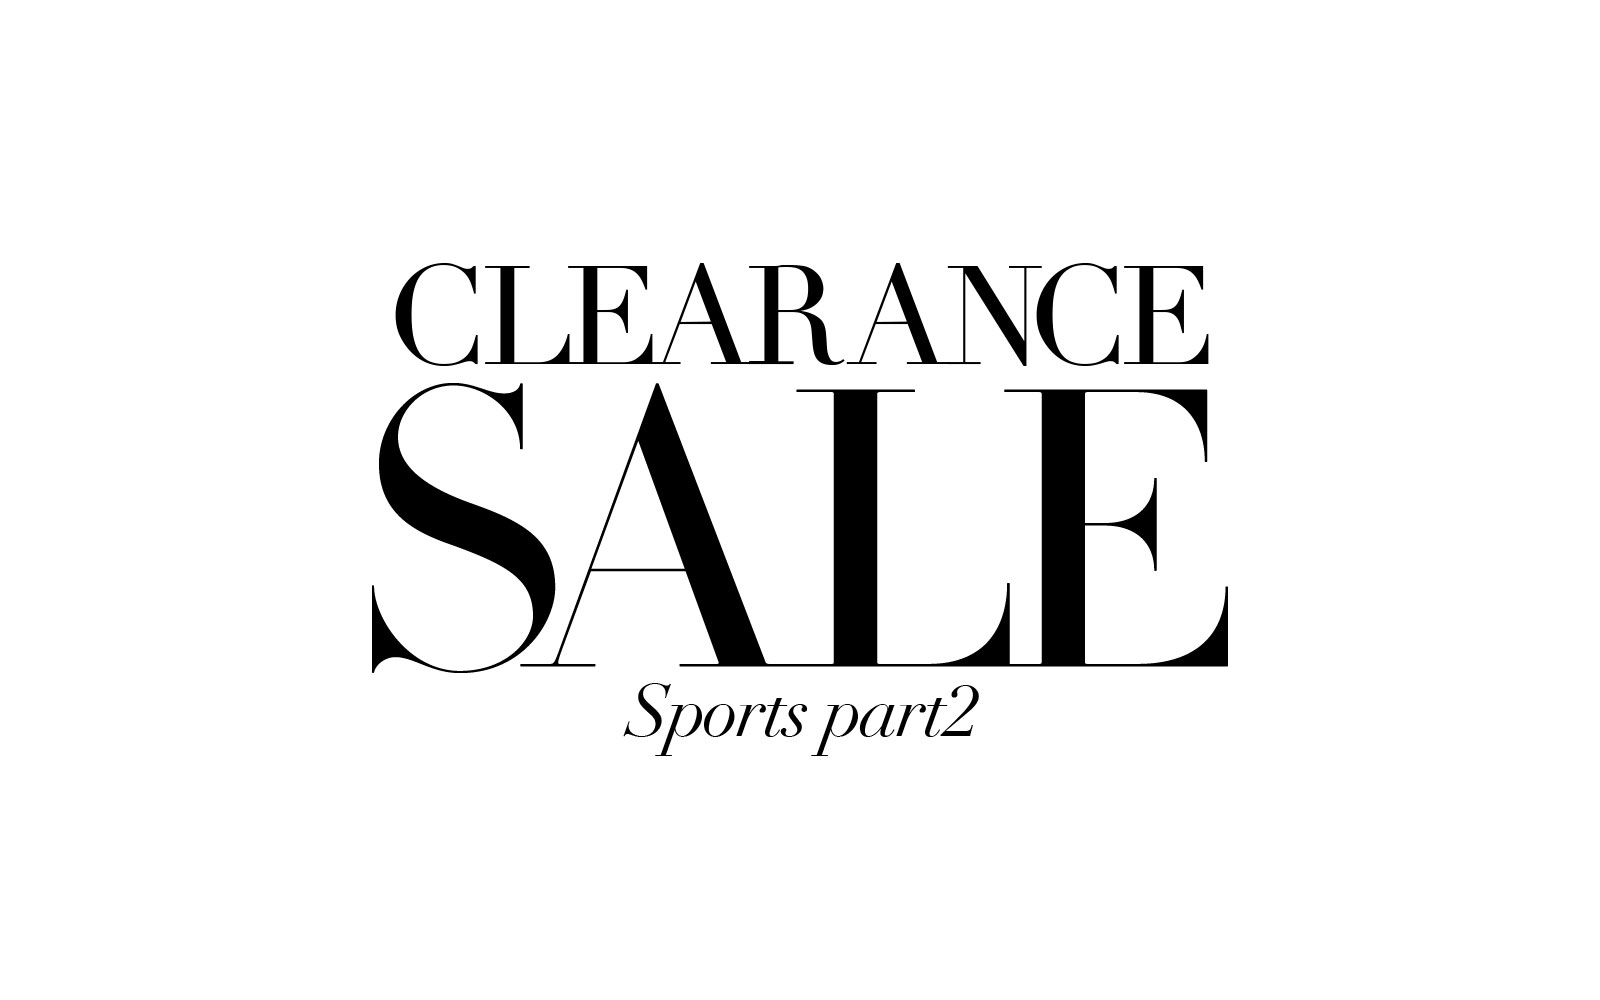 Clearance Sports part2